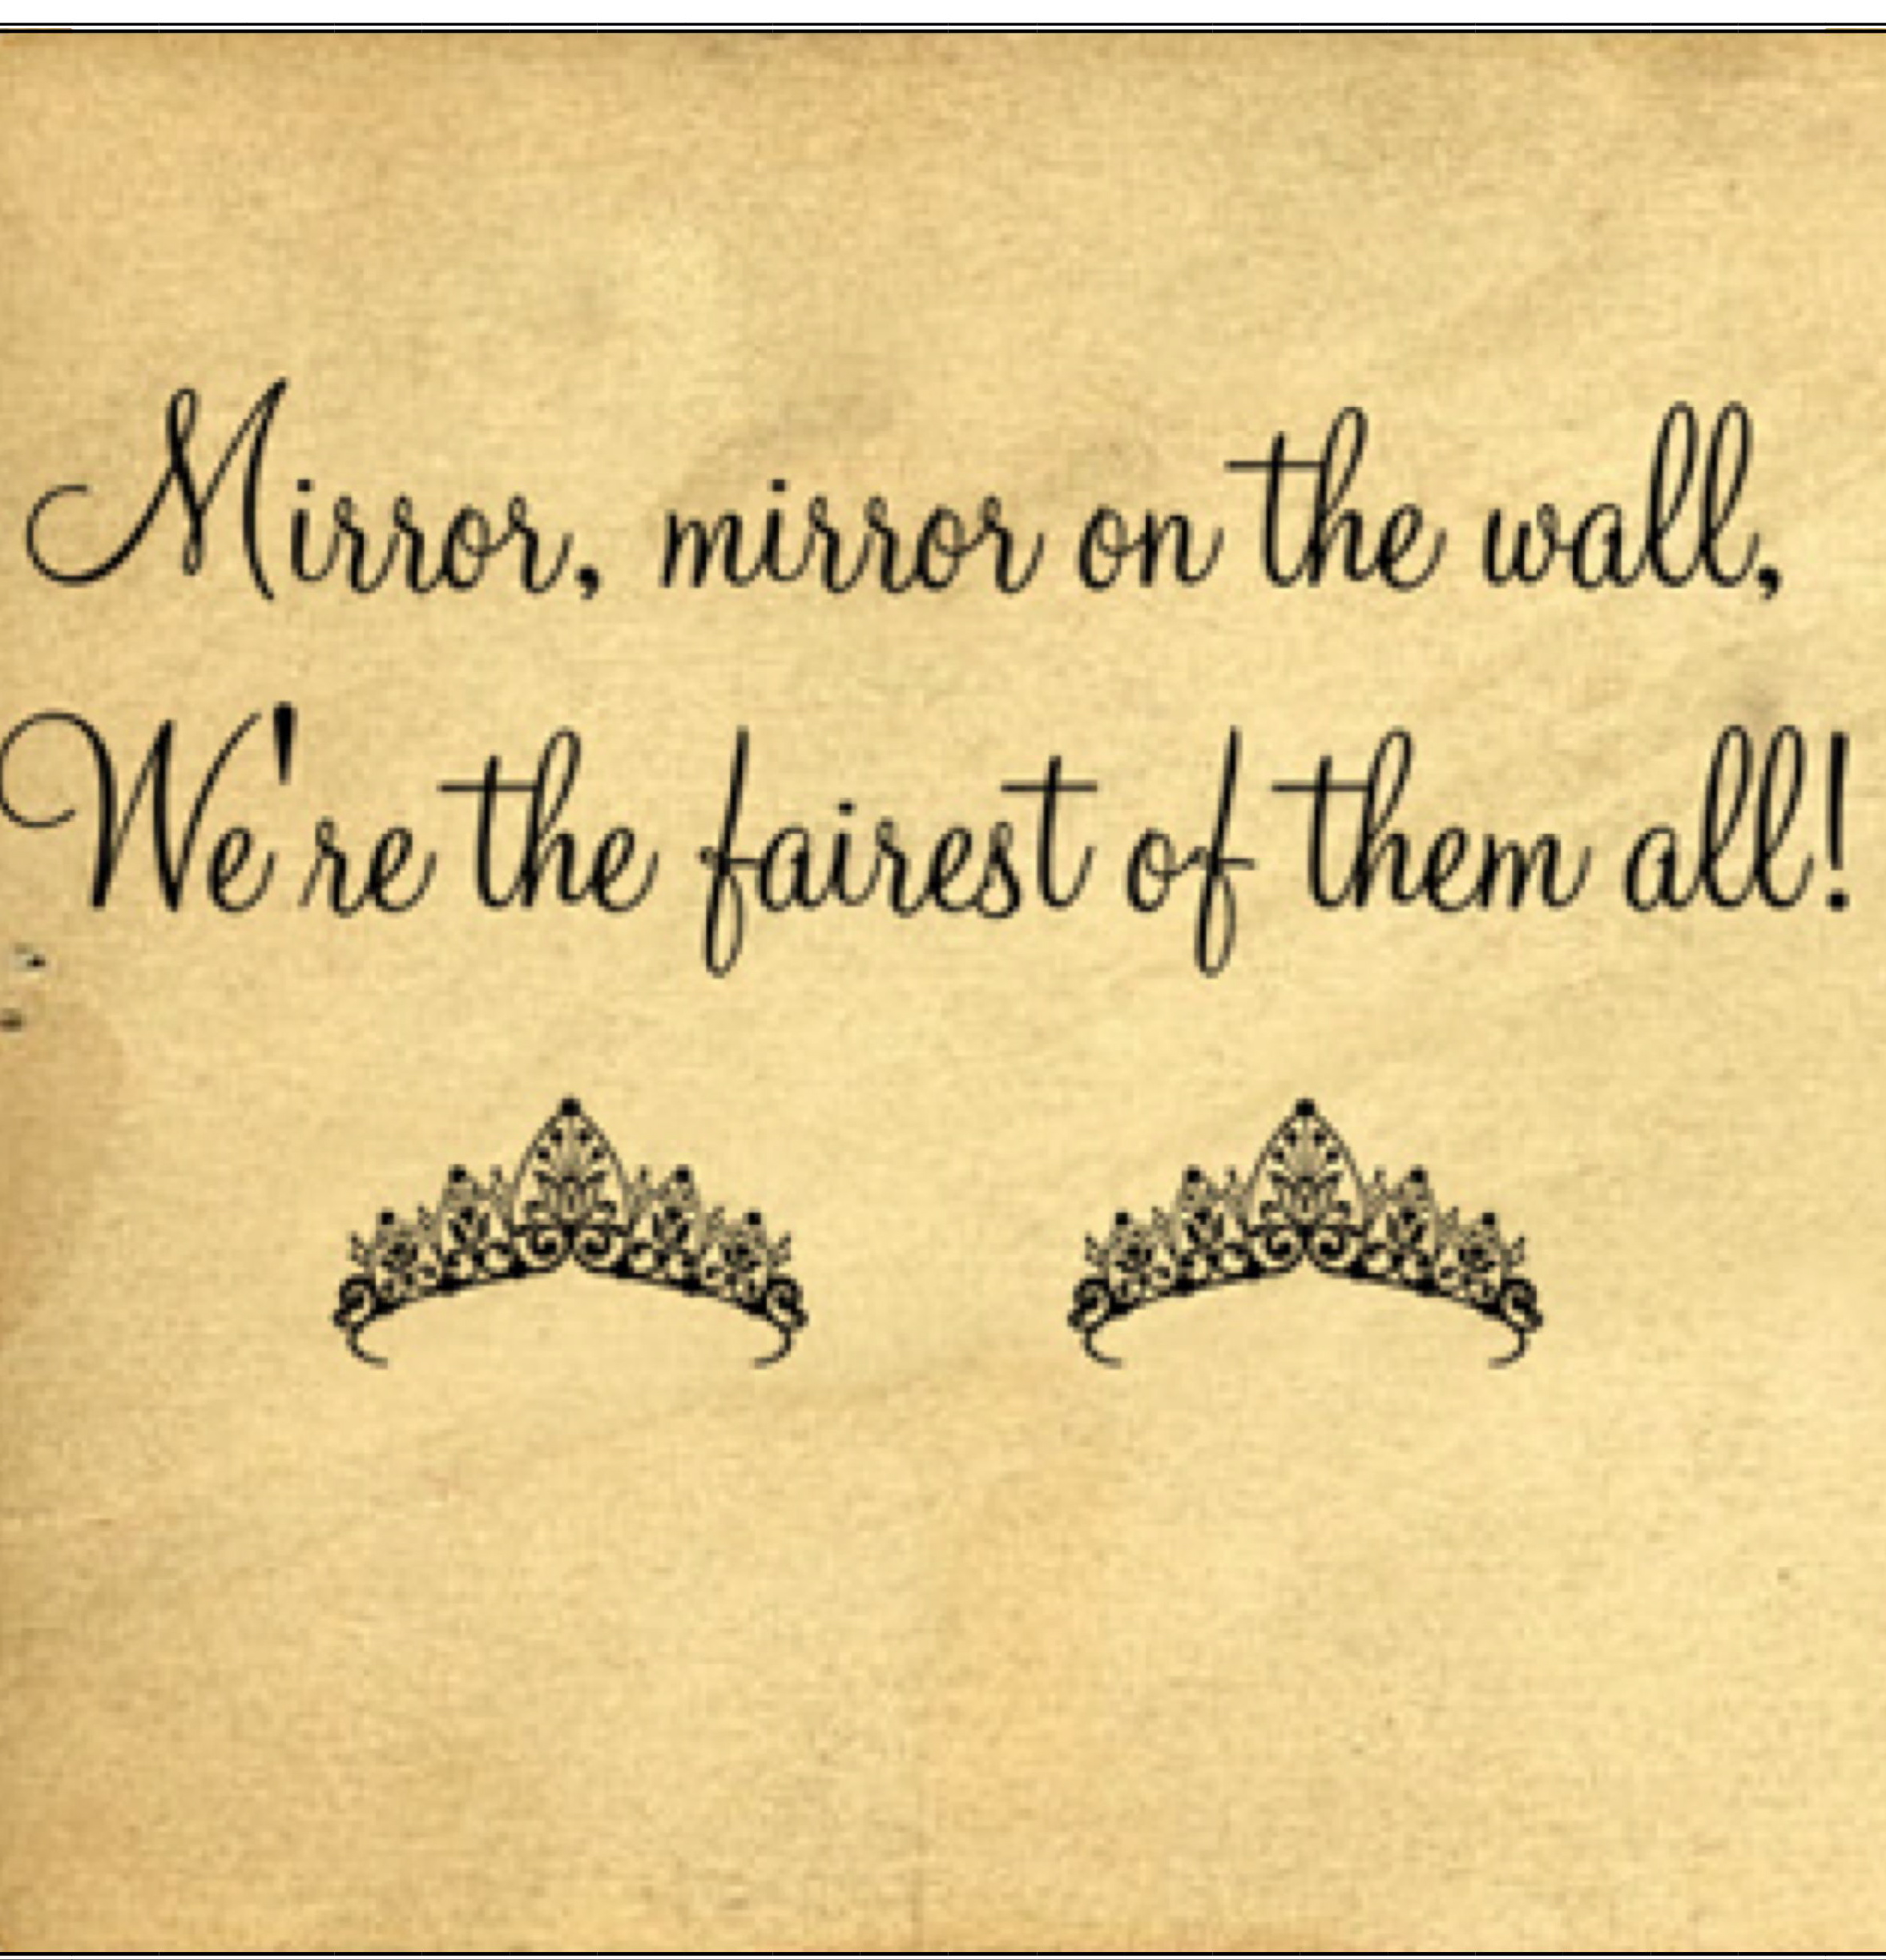 Mirror On The Wall Quotes. QuotesGram